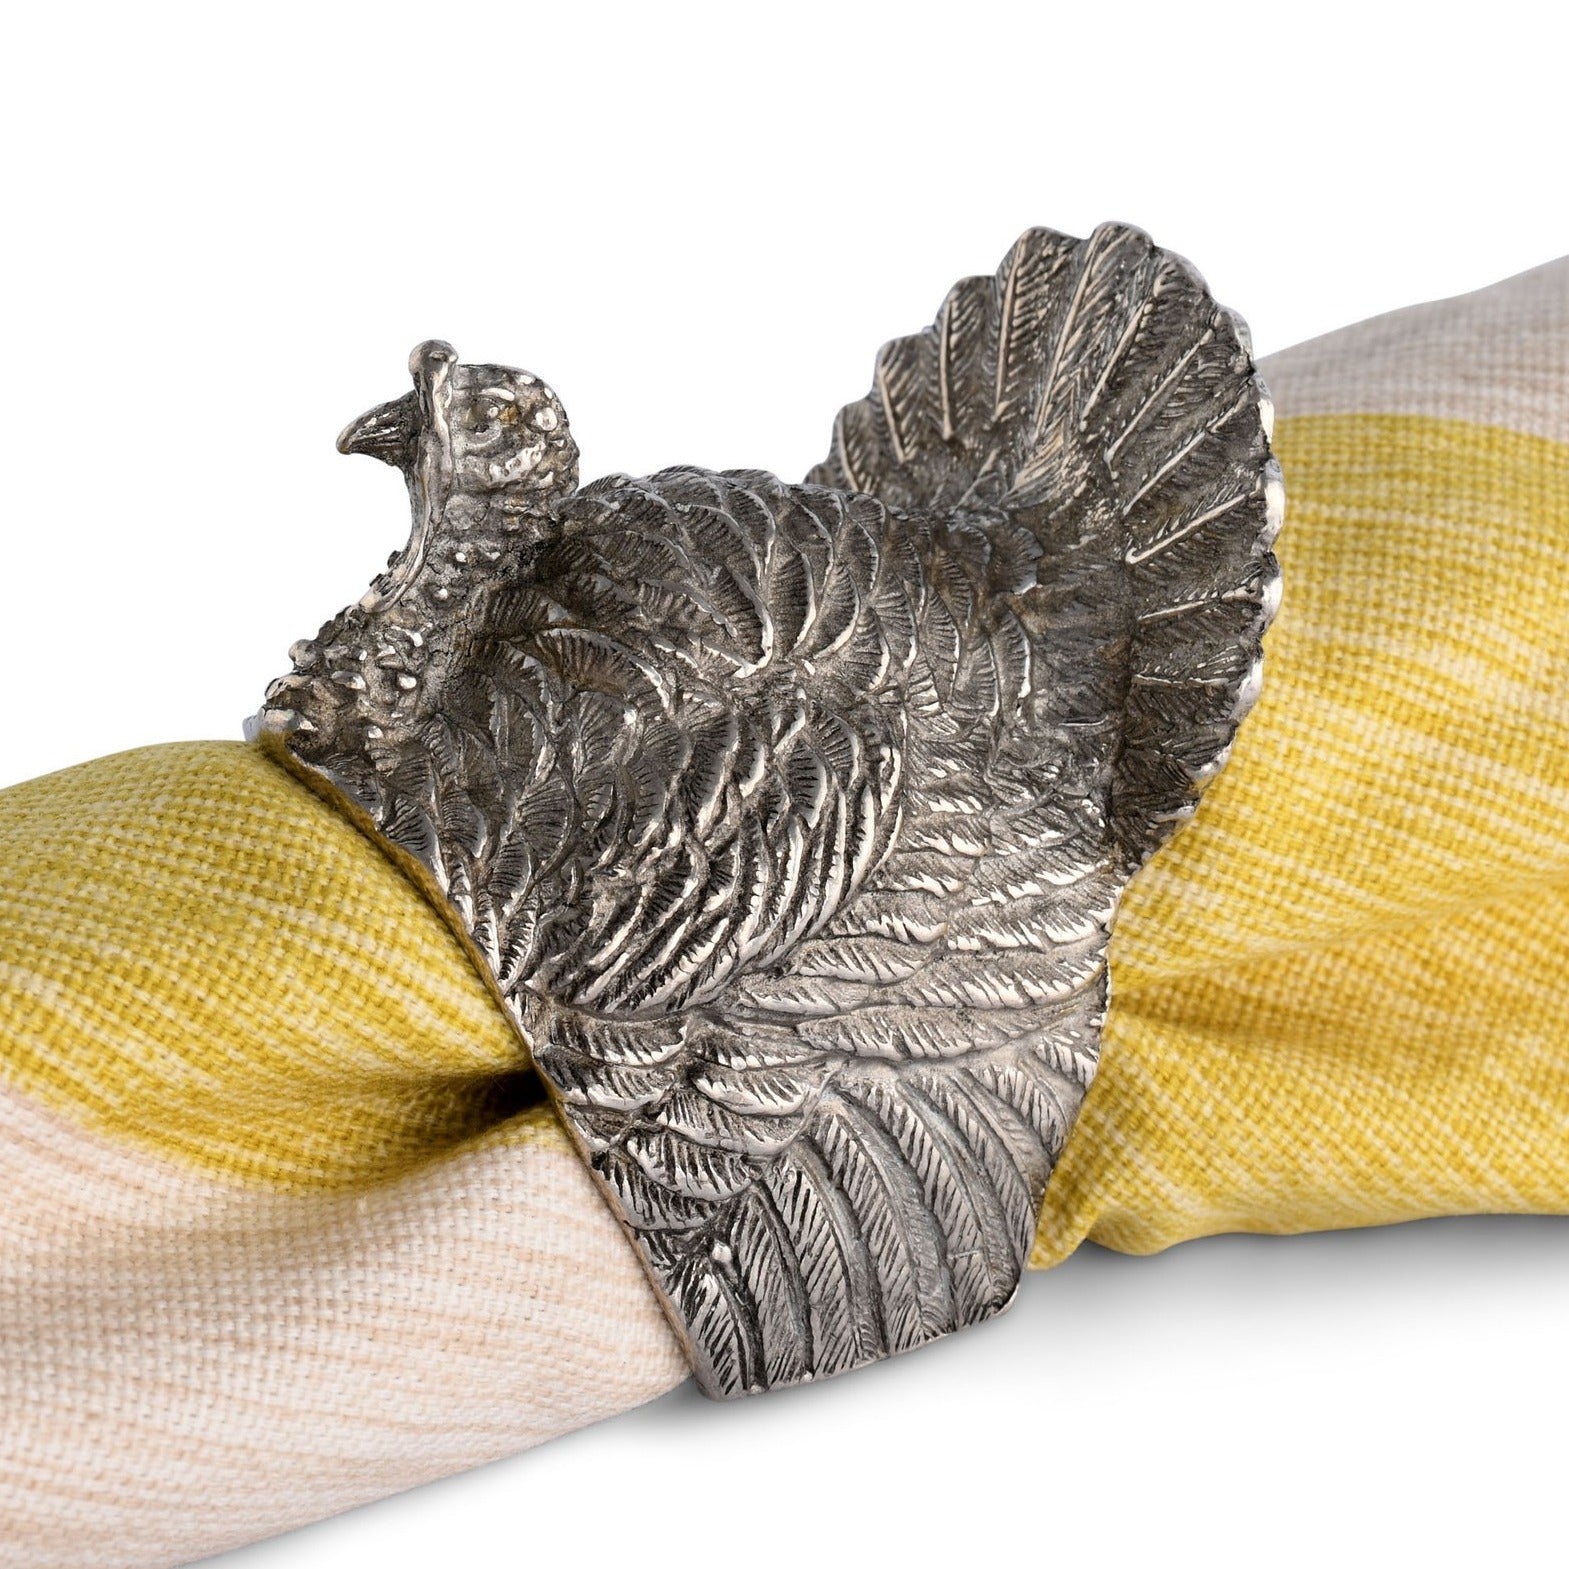 Solid Pewter Turkey Napkin Ring - Timothy De Clue Collection